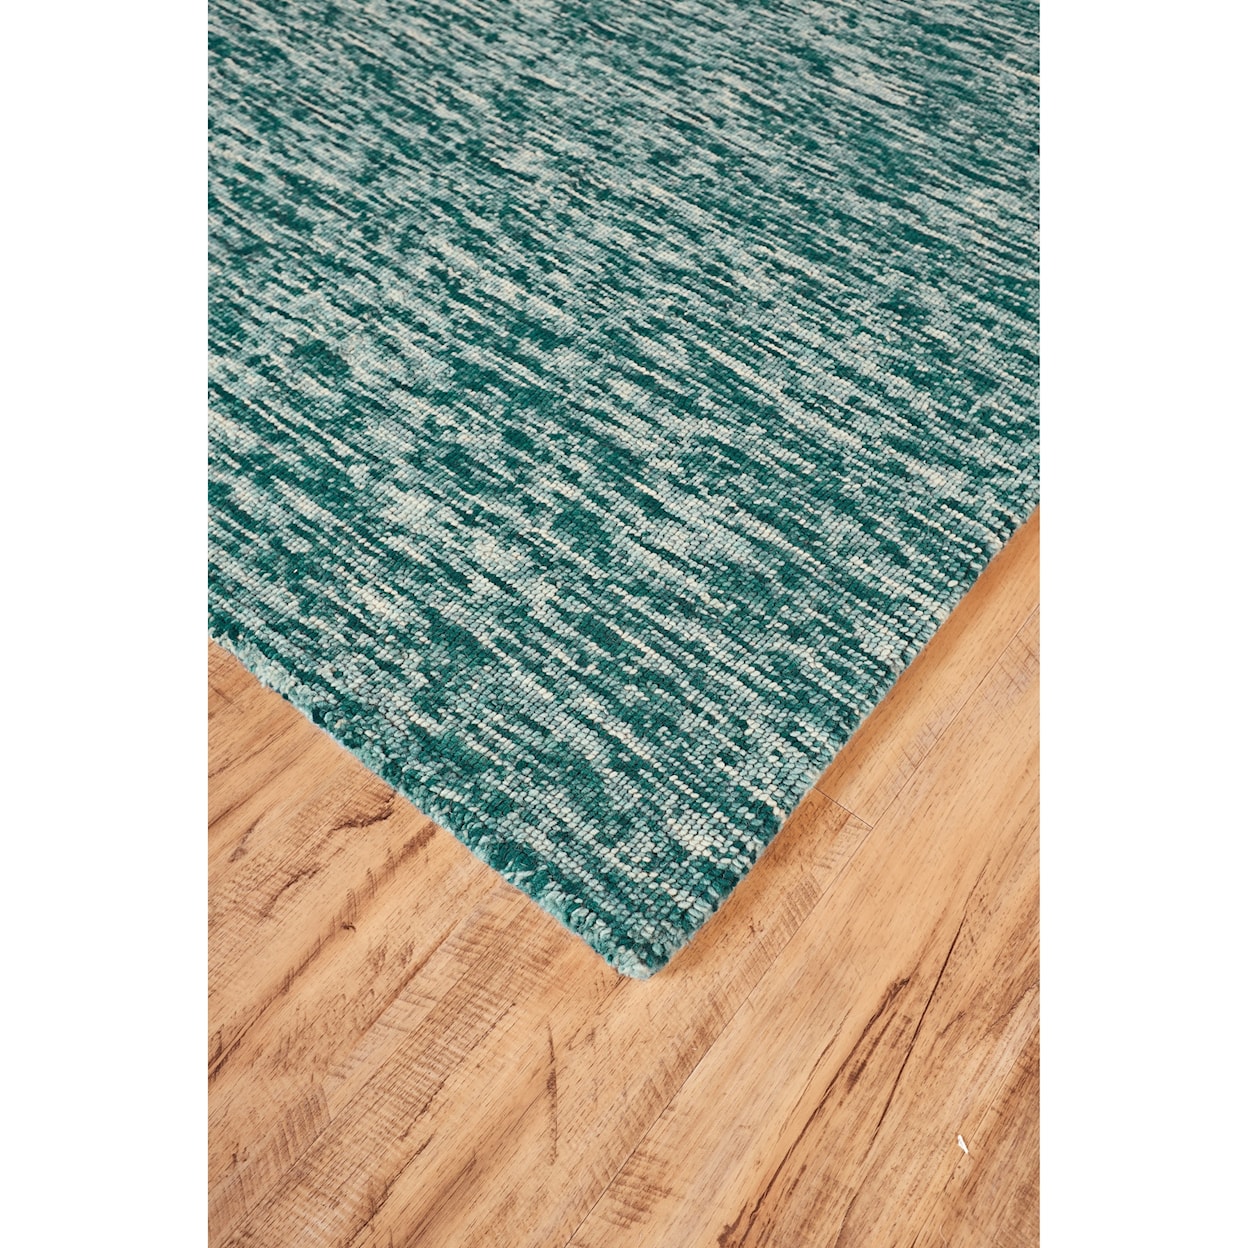 Feizy Rugs Cora Teal 2'-6" x 8' Runner Rug